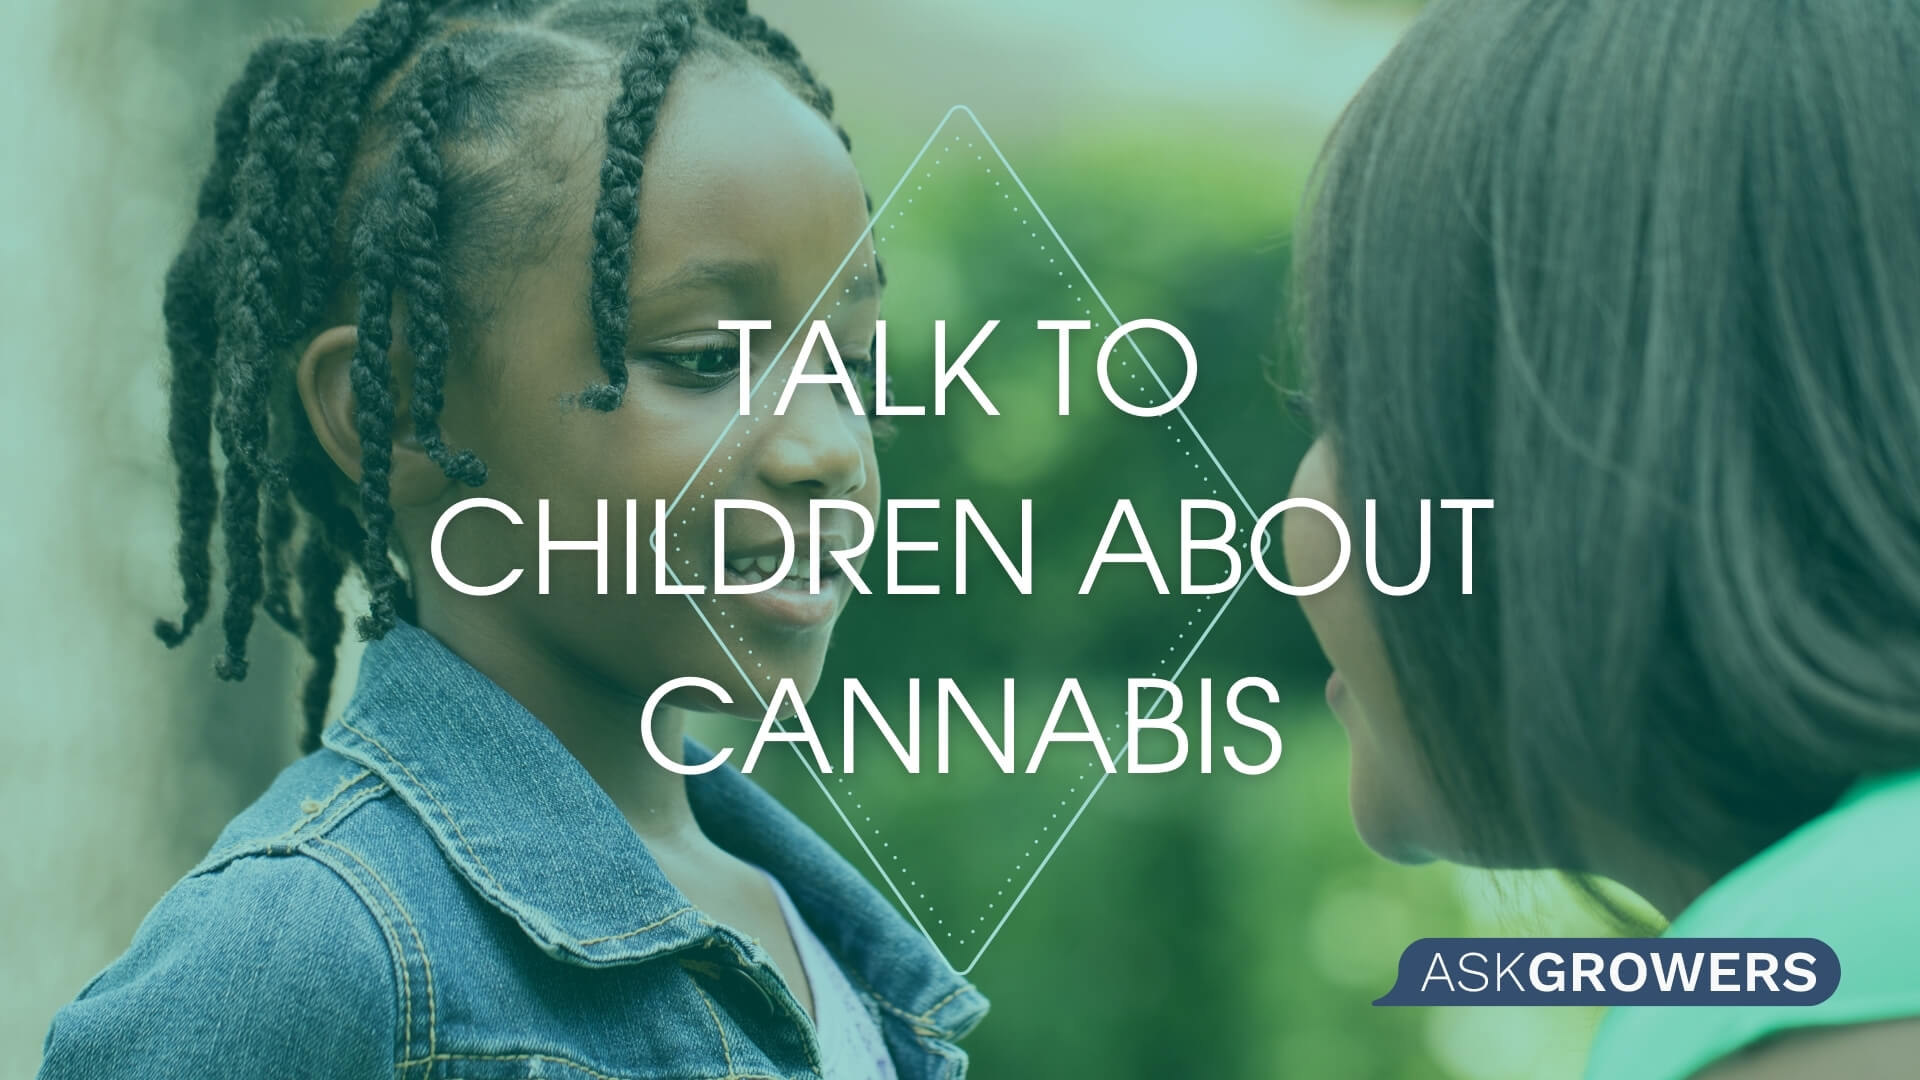 How to Talk to Children of Different Ages About Cannabis